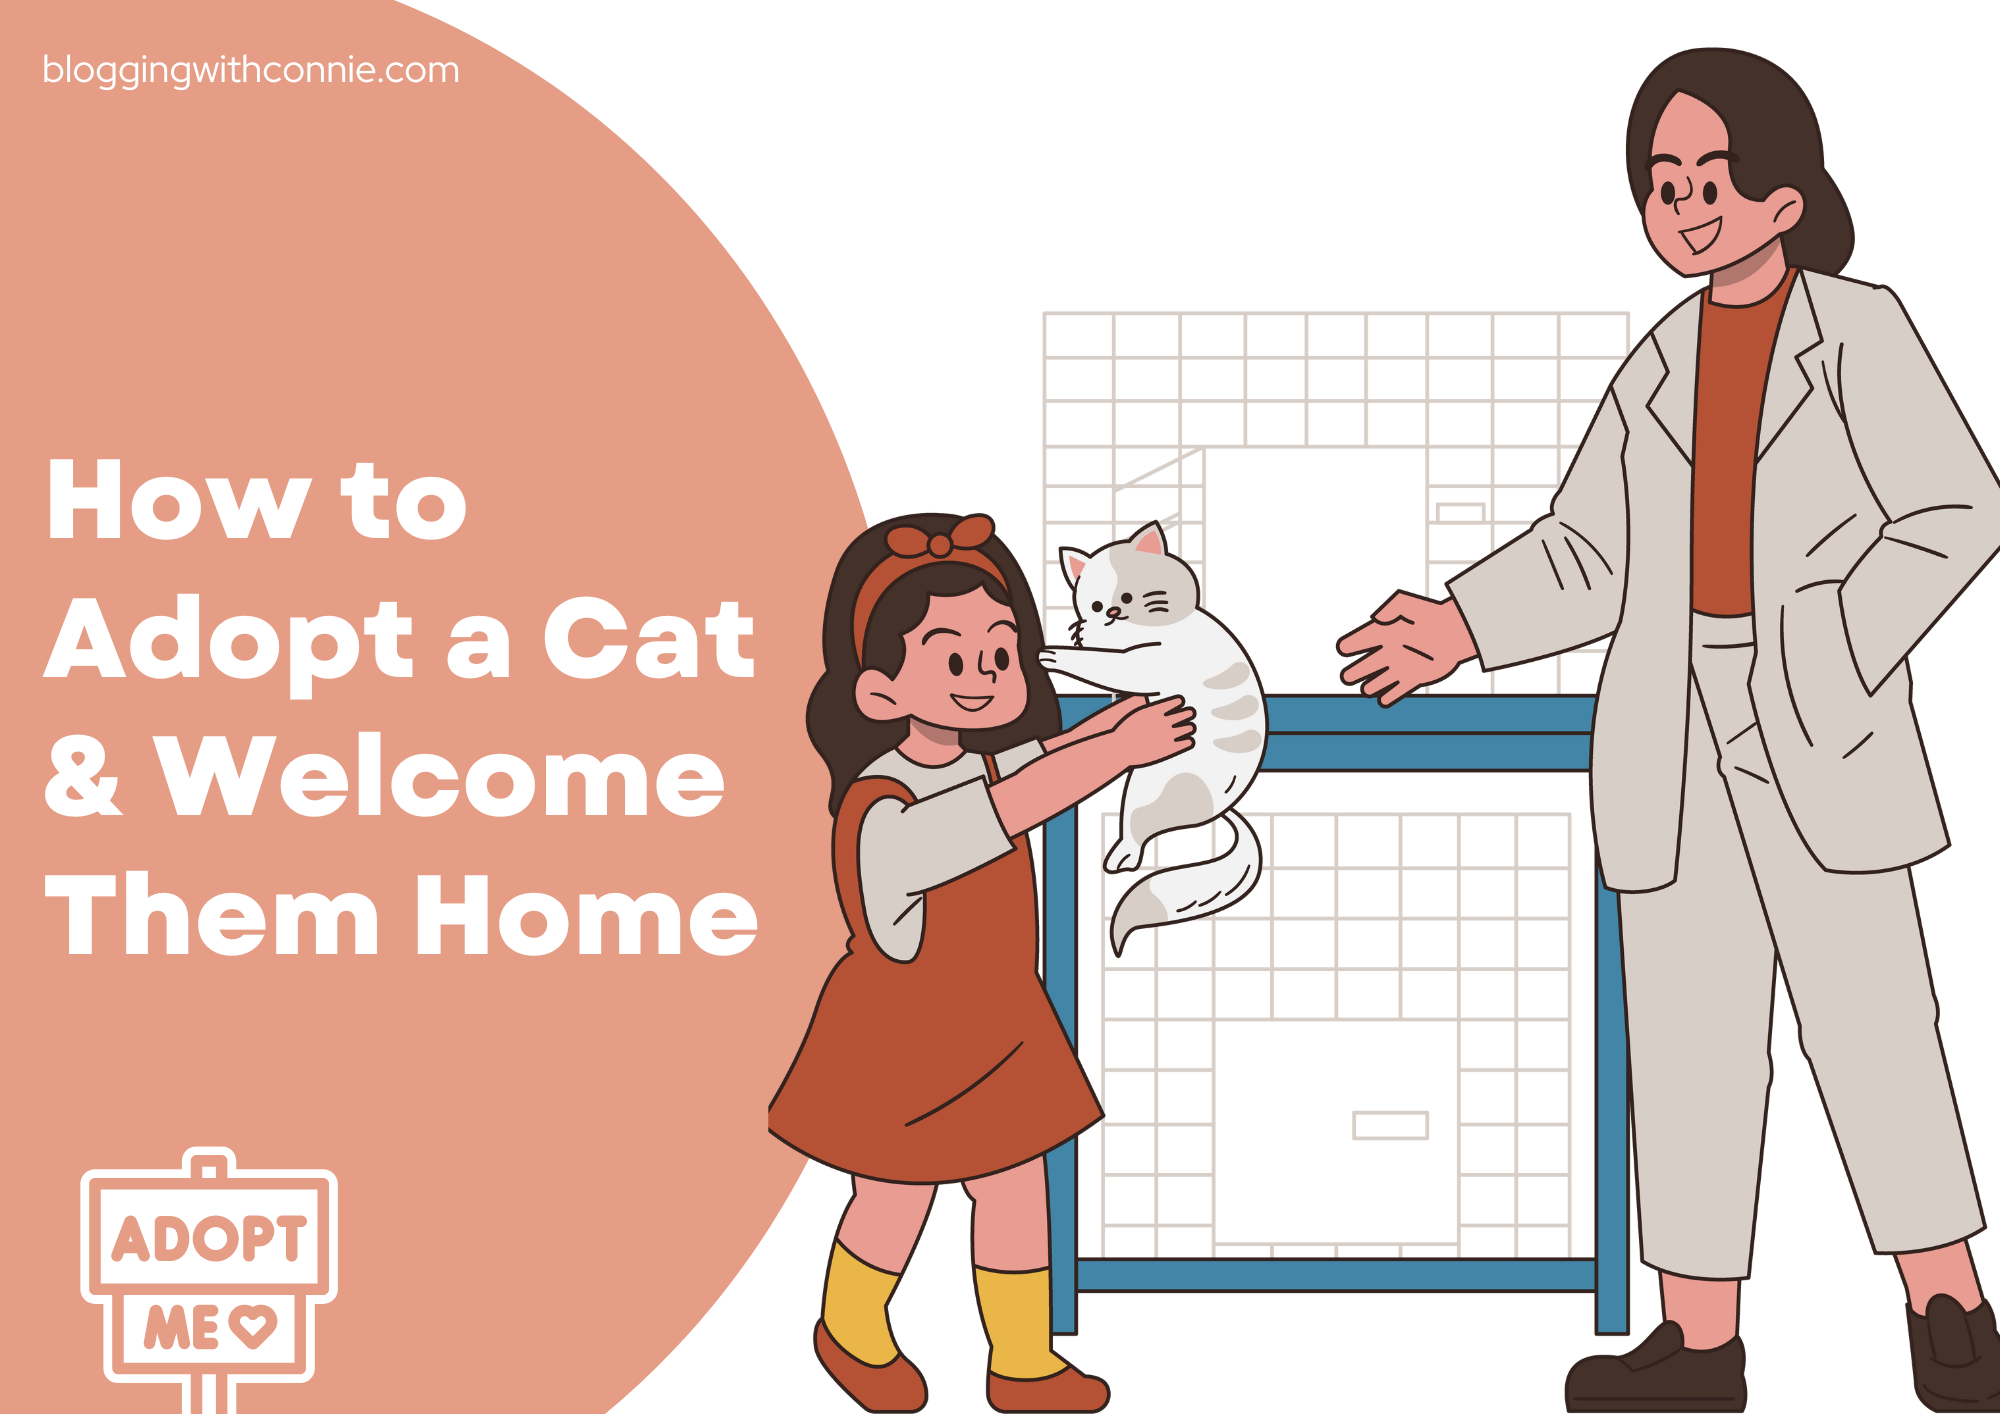 How to adopt a cat and welcome them home